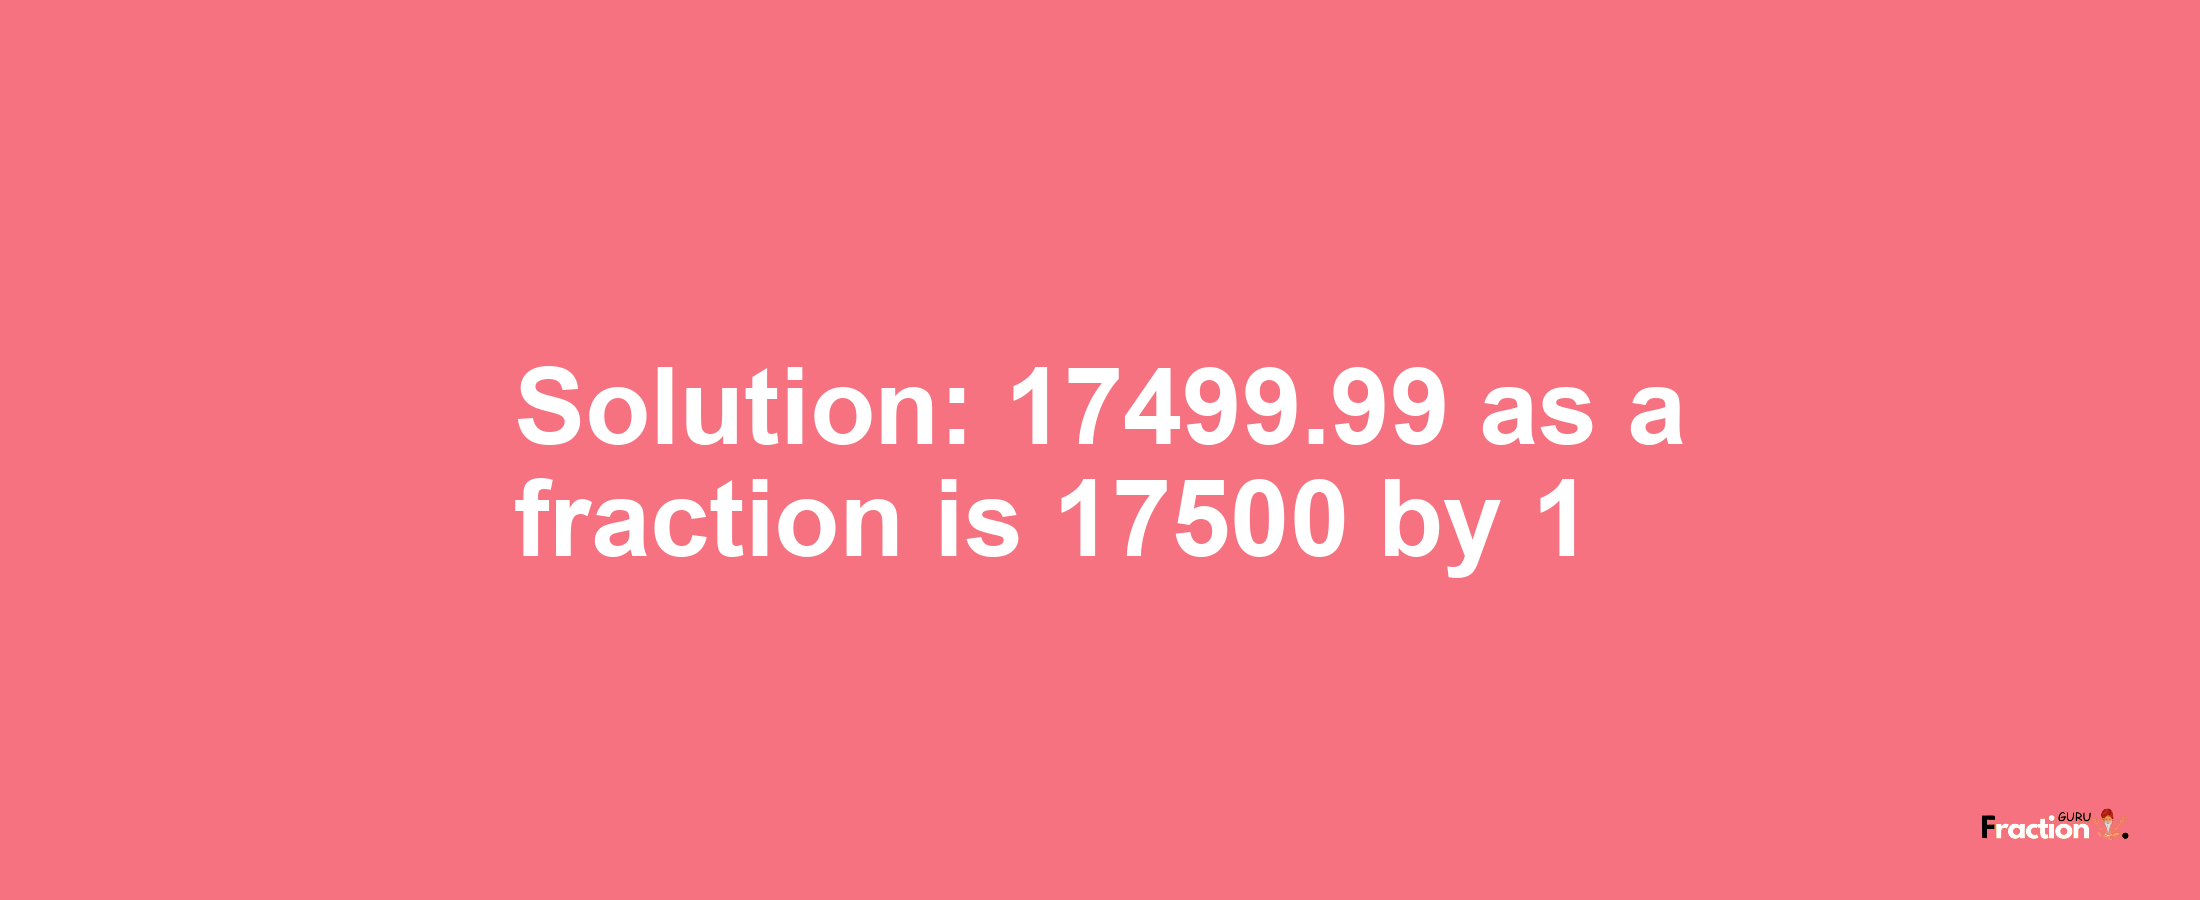 Solution:17499.99 as a fraction is 17500/1